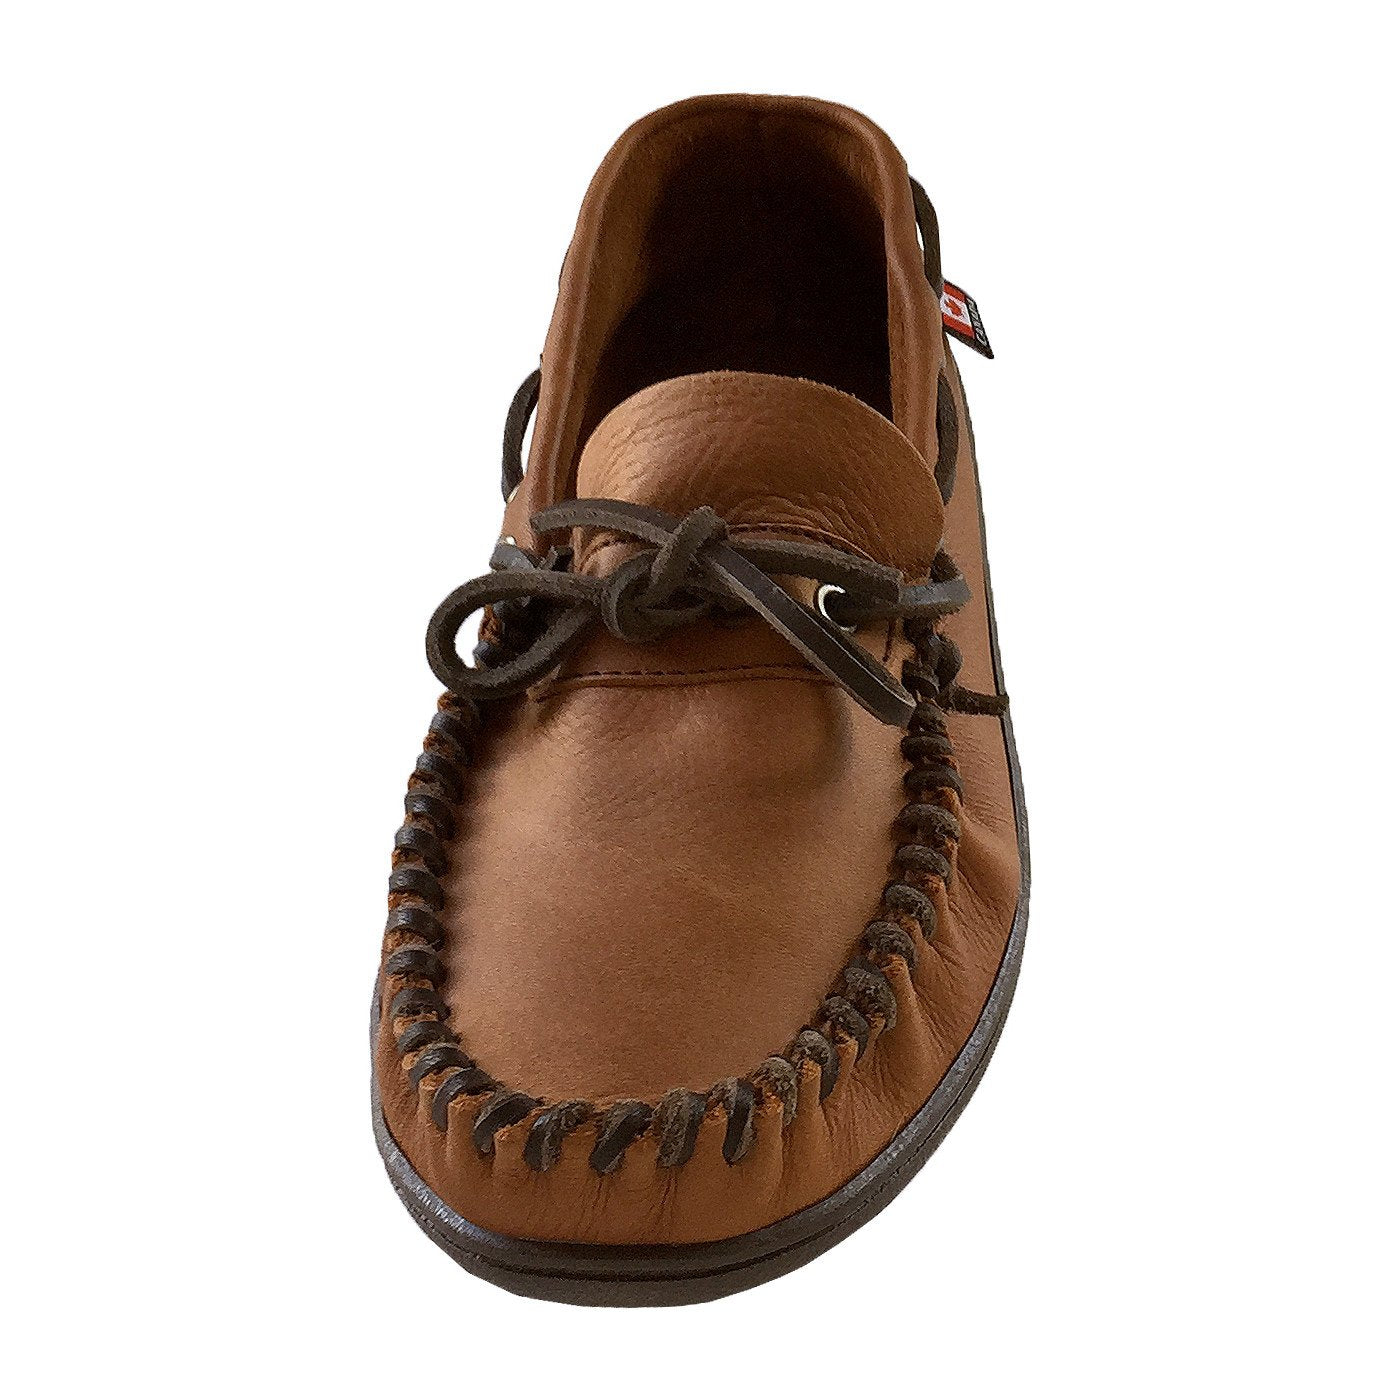 Men's Wide Leather Moccasin Shoes